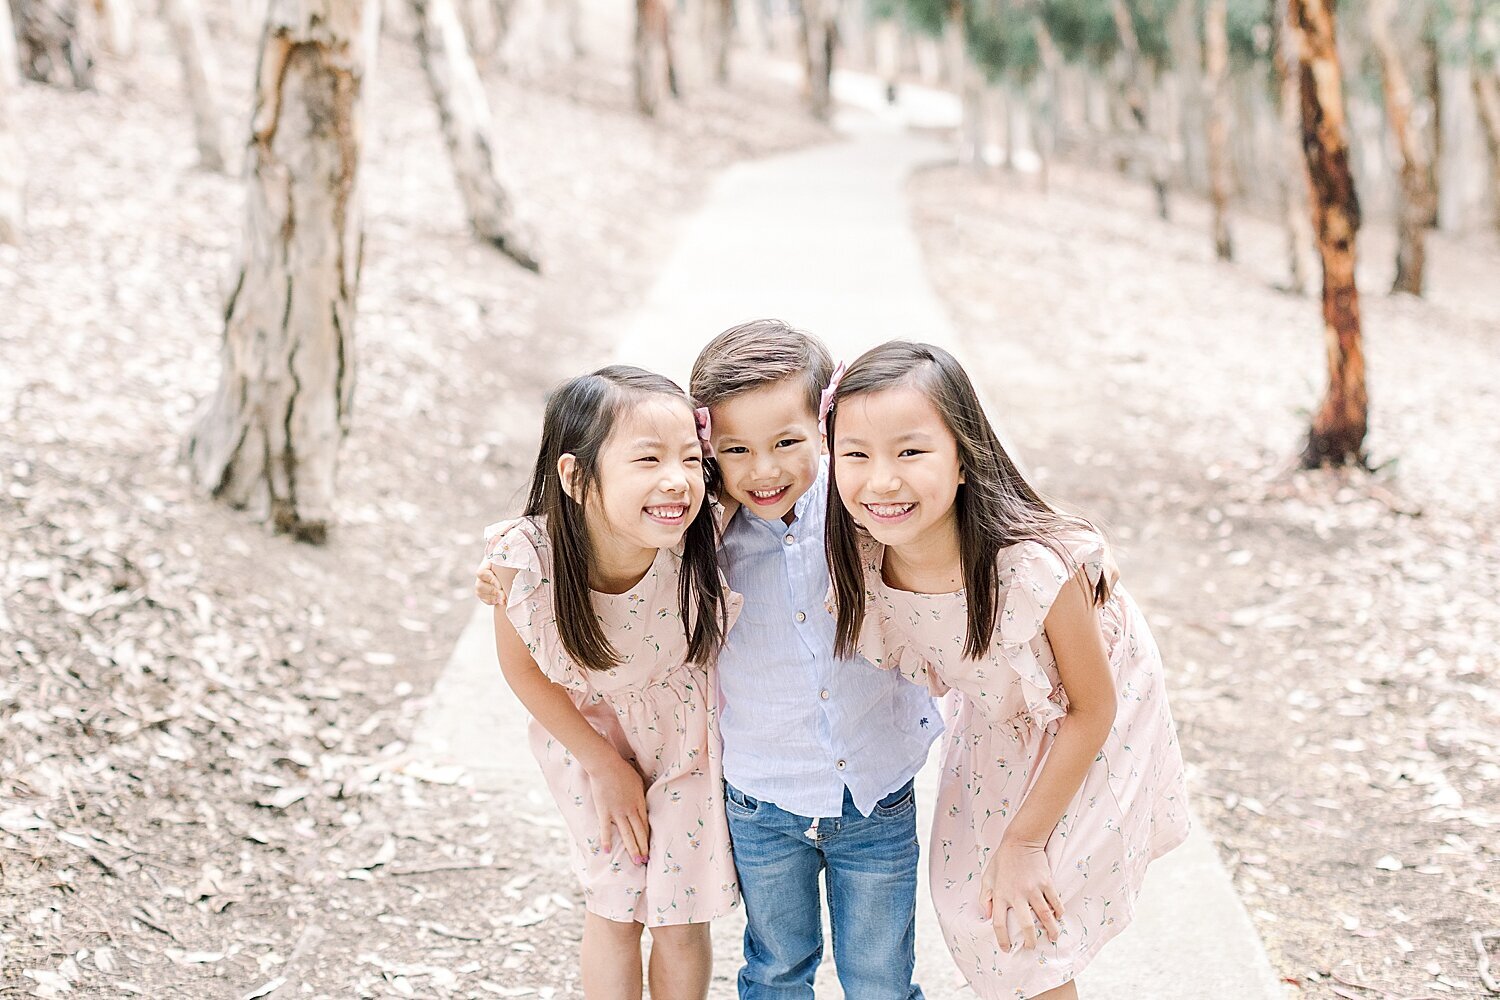 Outdoor family session at Serrano Creek Park in Orange County, CA. Photo by Ambre Williams Photography.